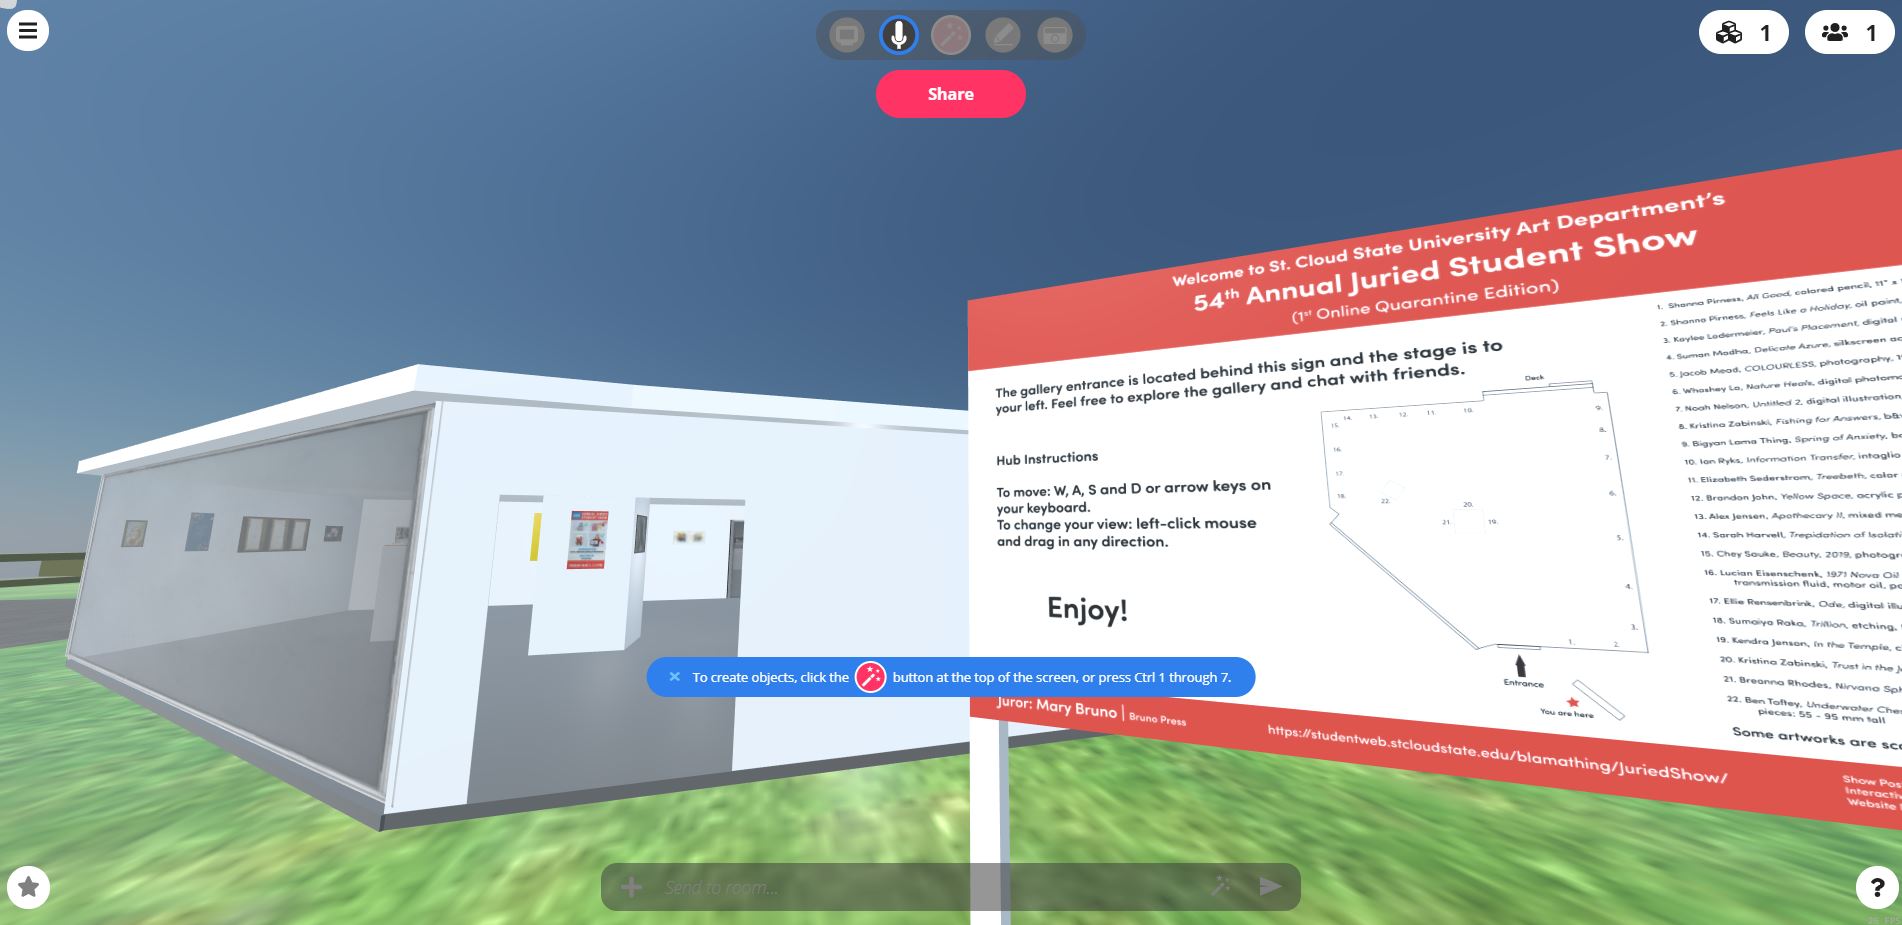 Screenshot from the virtual reality gallery